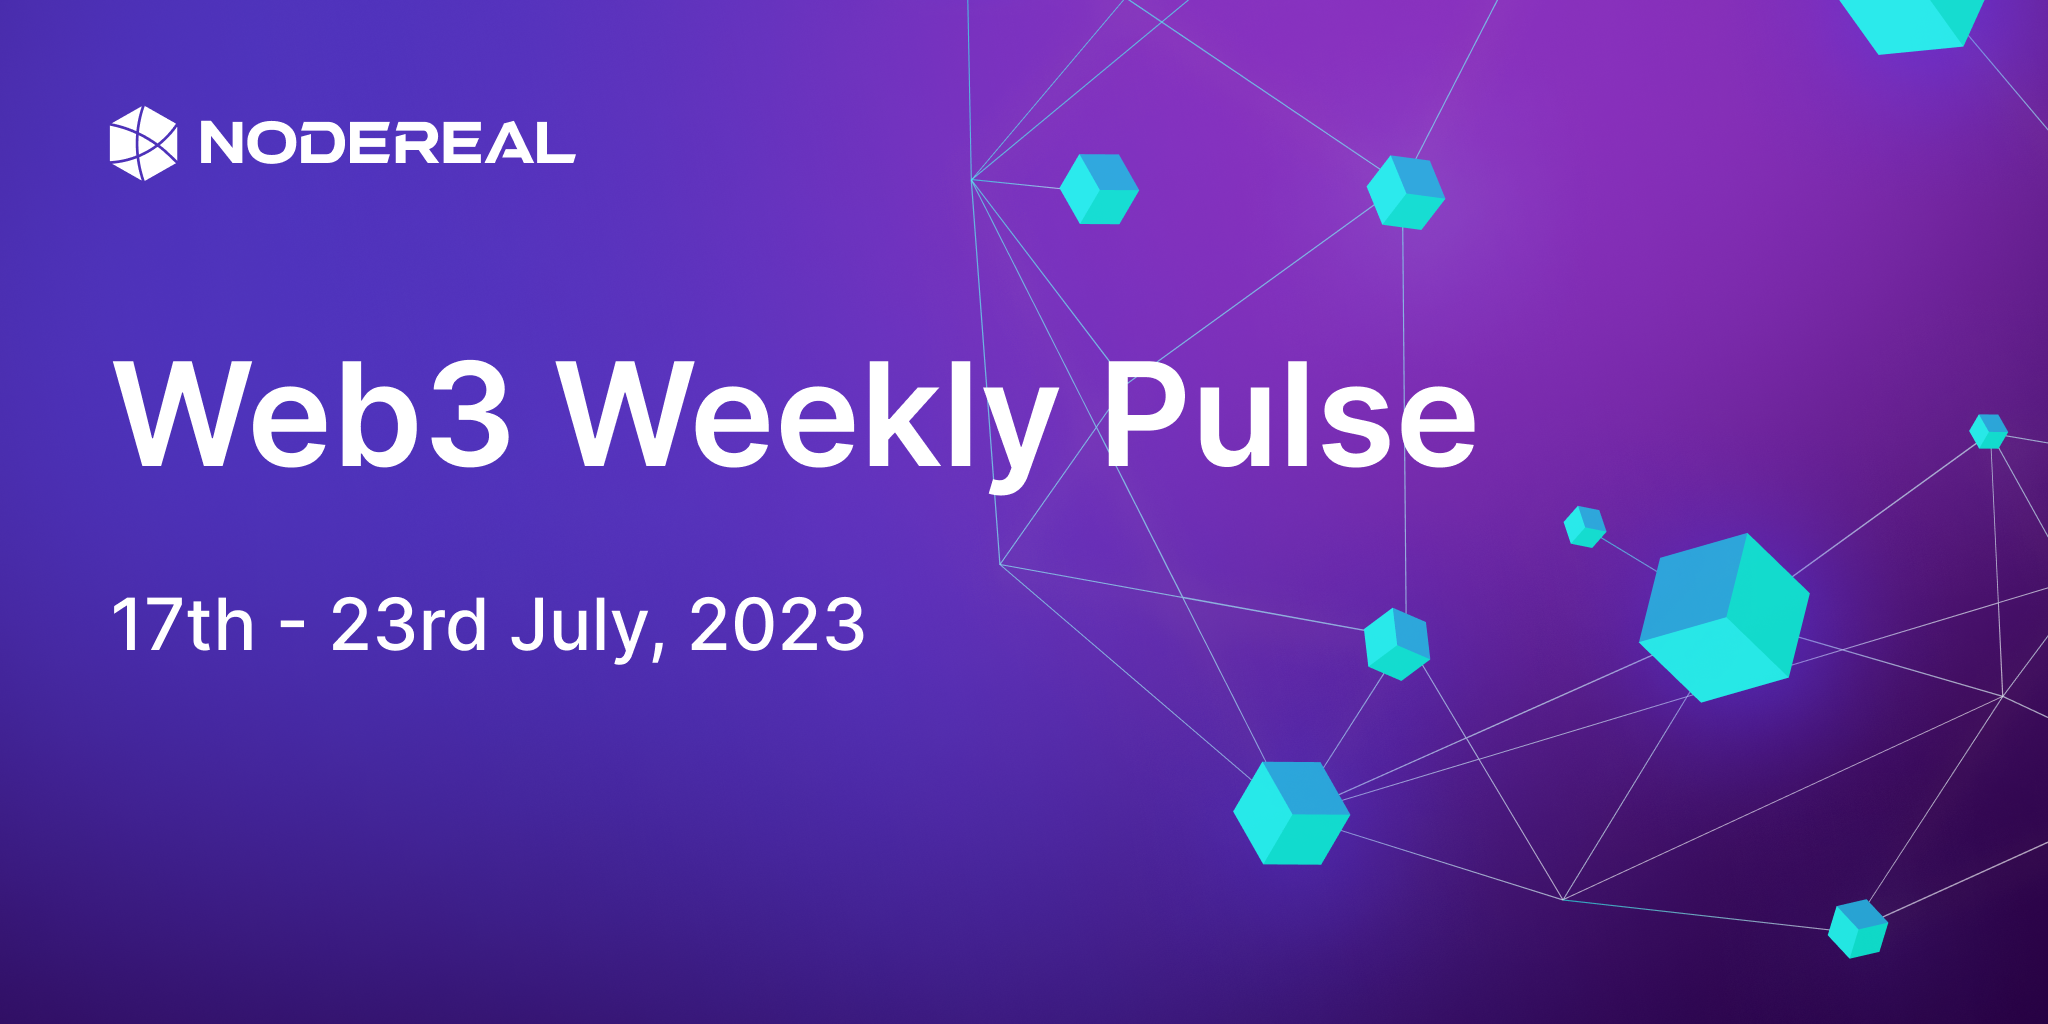 Web3 Weekly Pulse: 17th - 23rd July